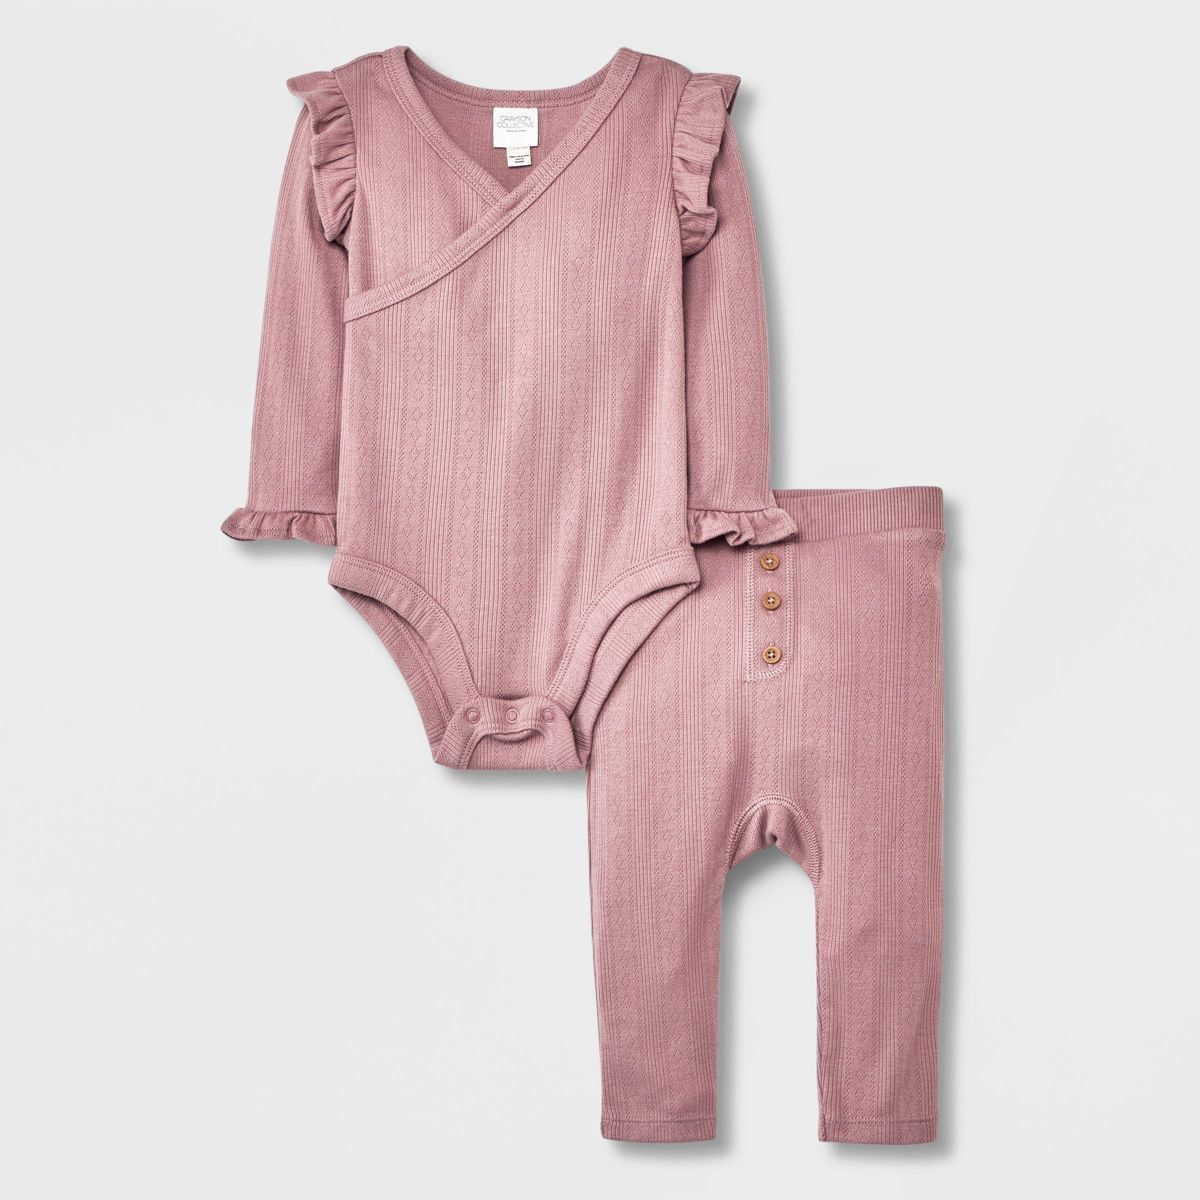 Grayson Collective Baby Girls' Solid 2pc Top & Bottom Set - Pink | Target